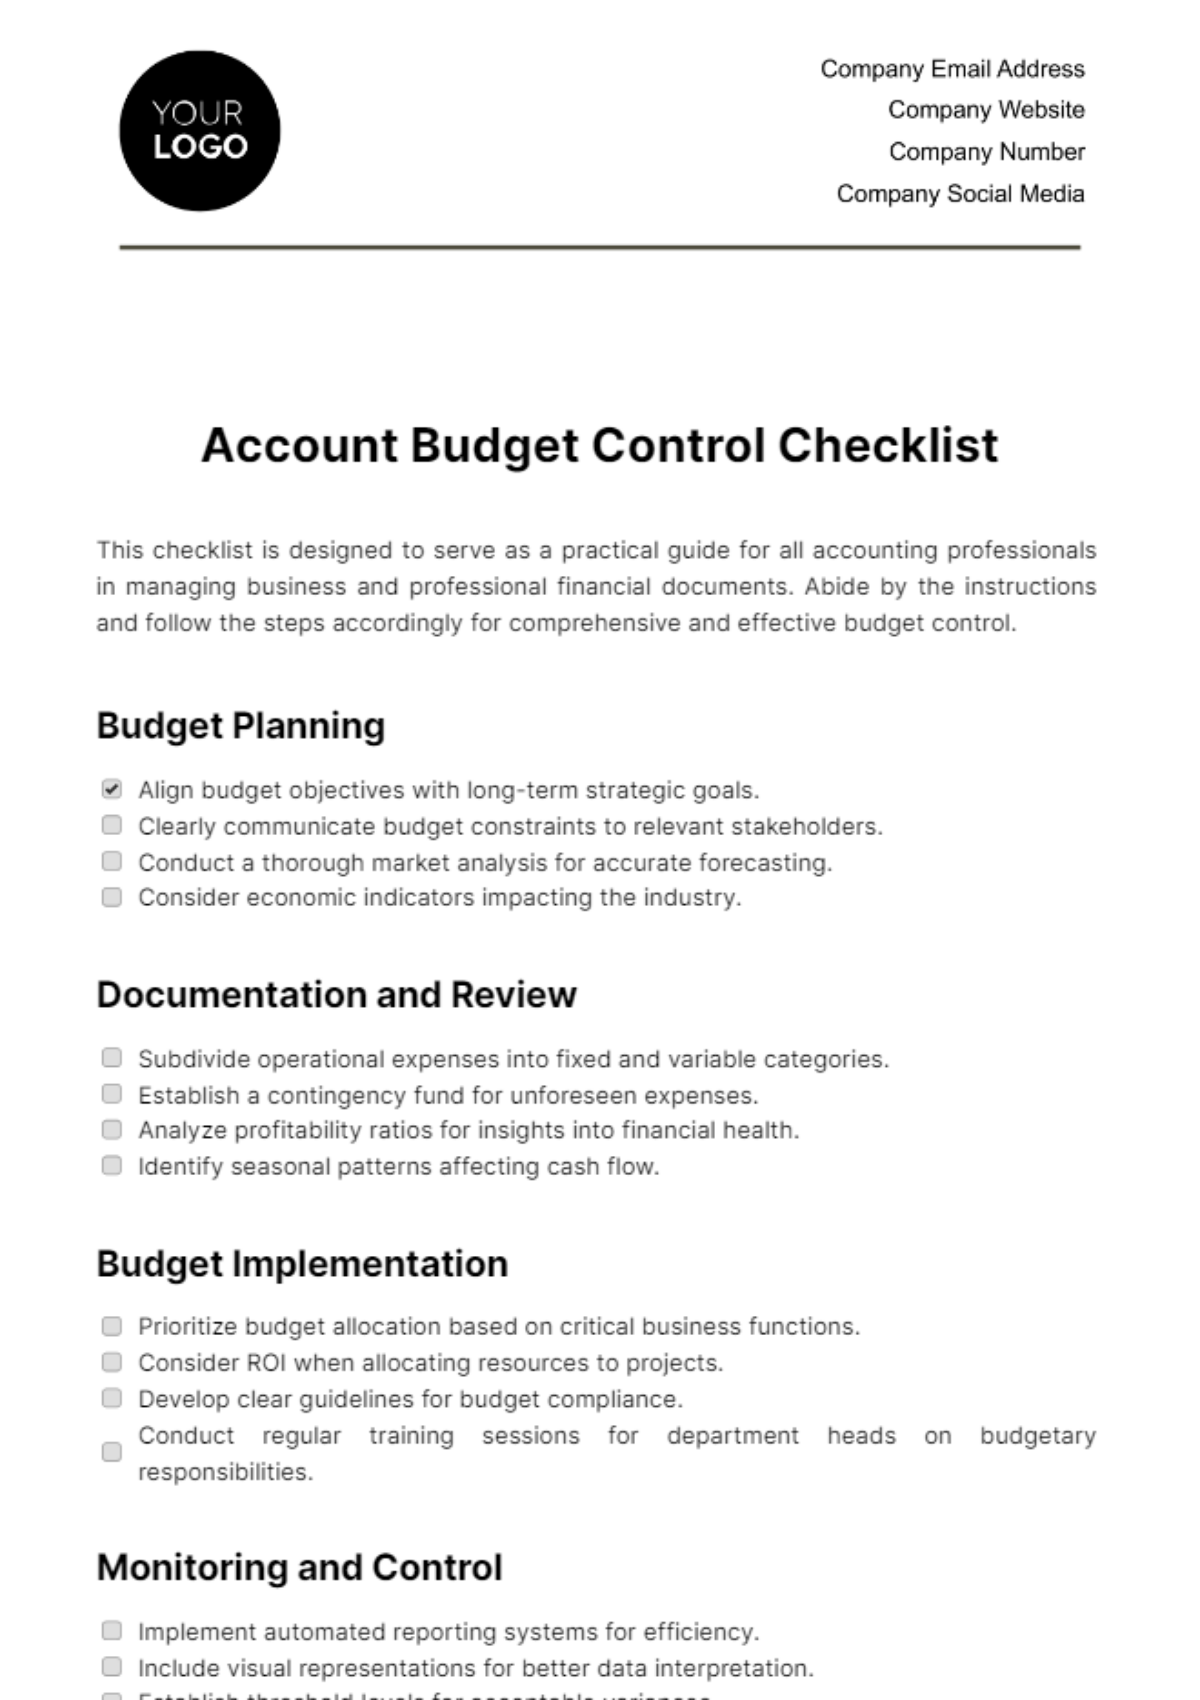 Free Account Budget Control Checklist Template